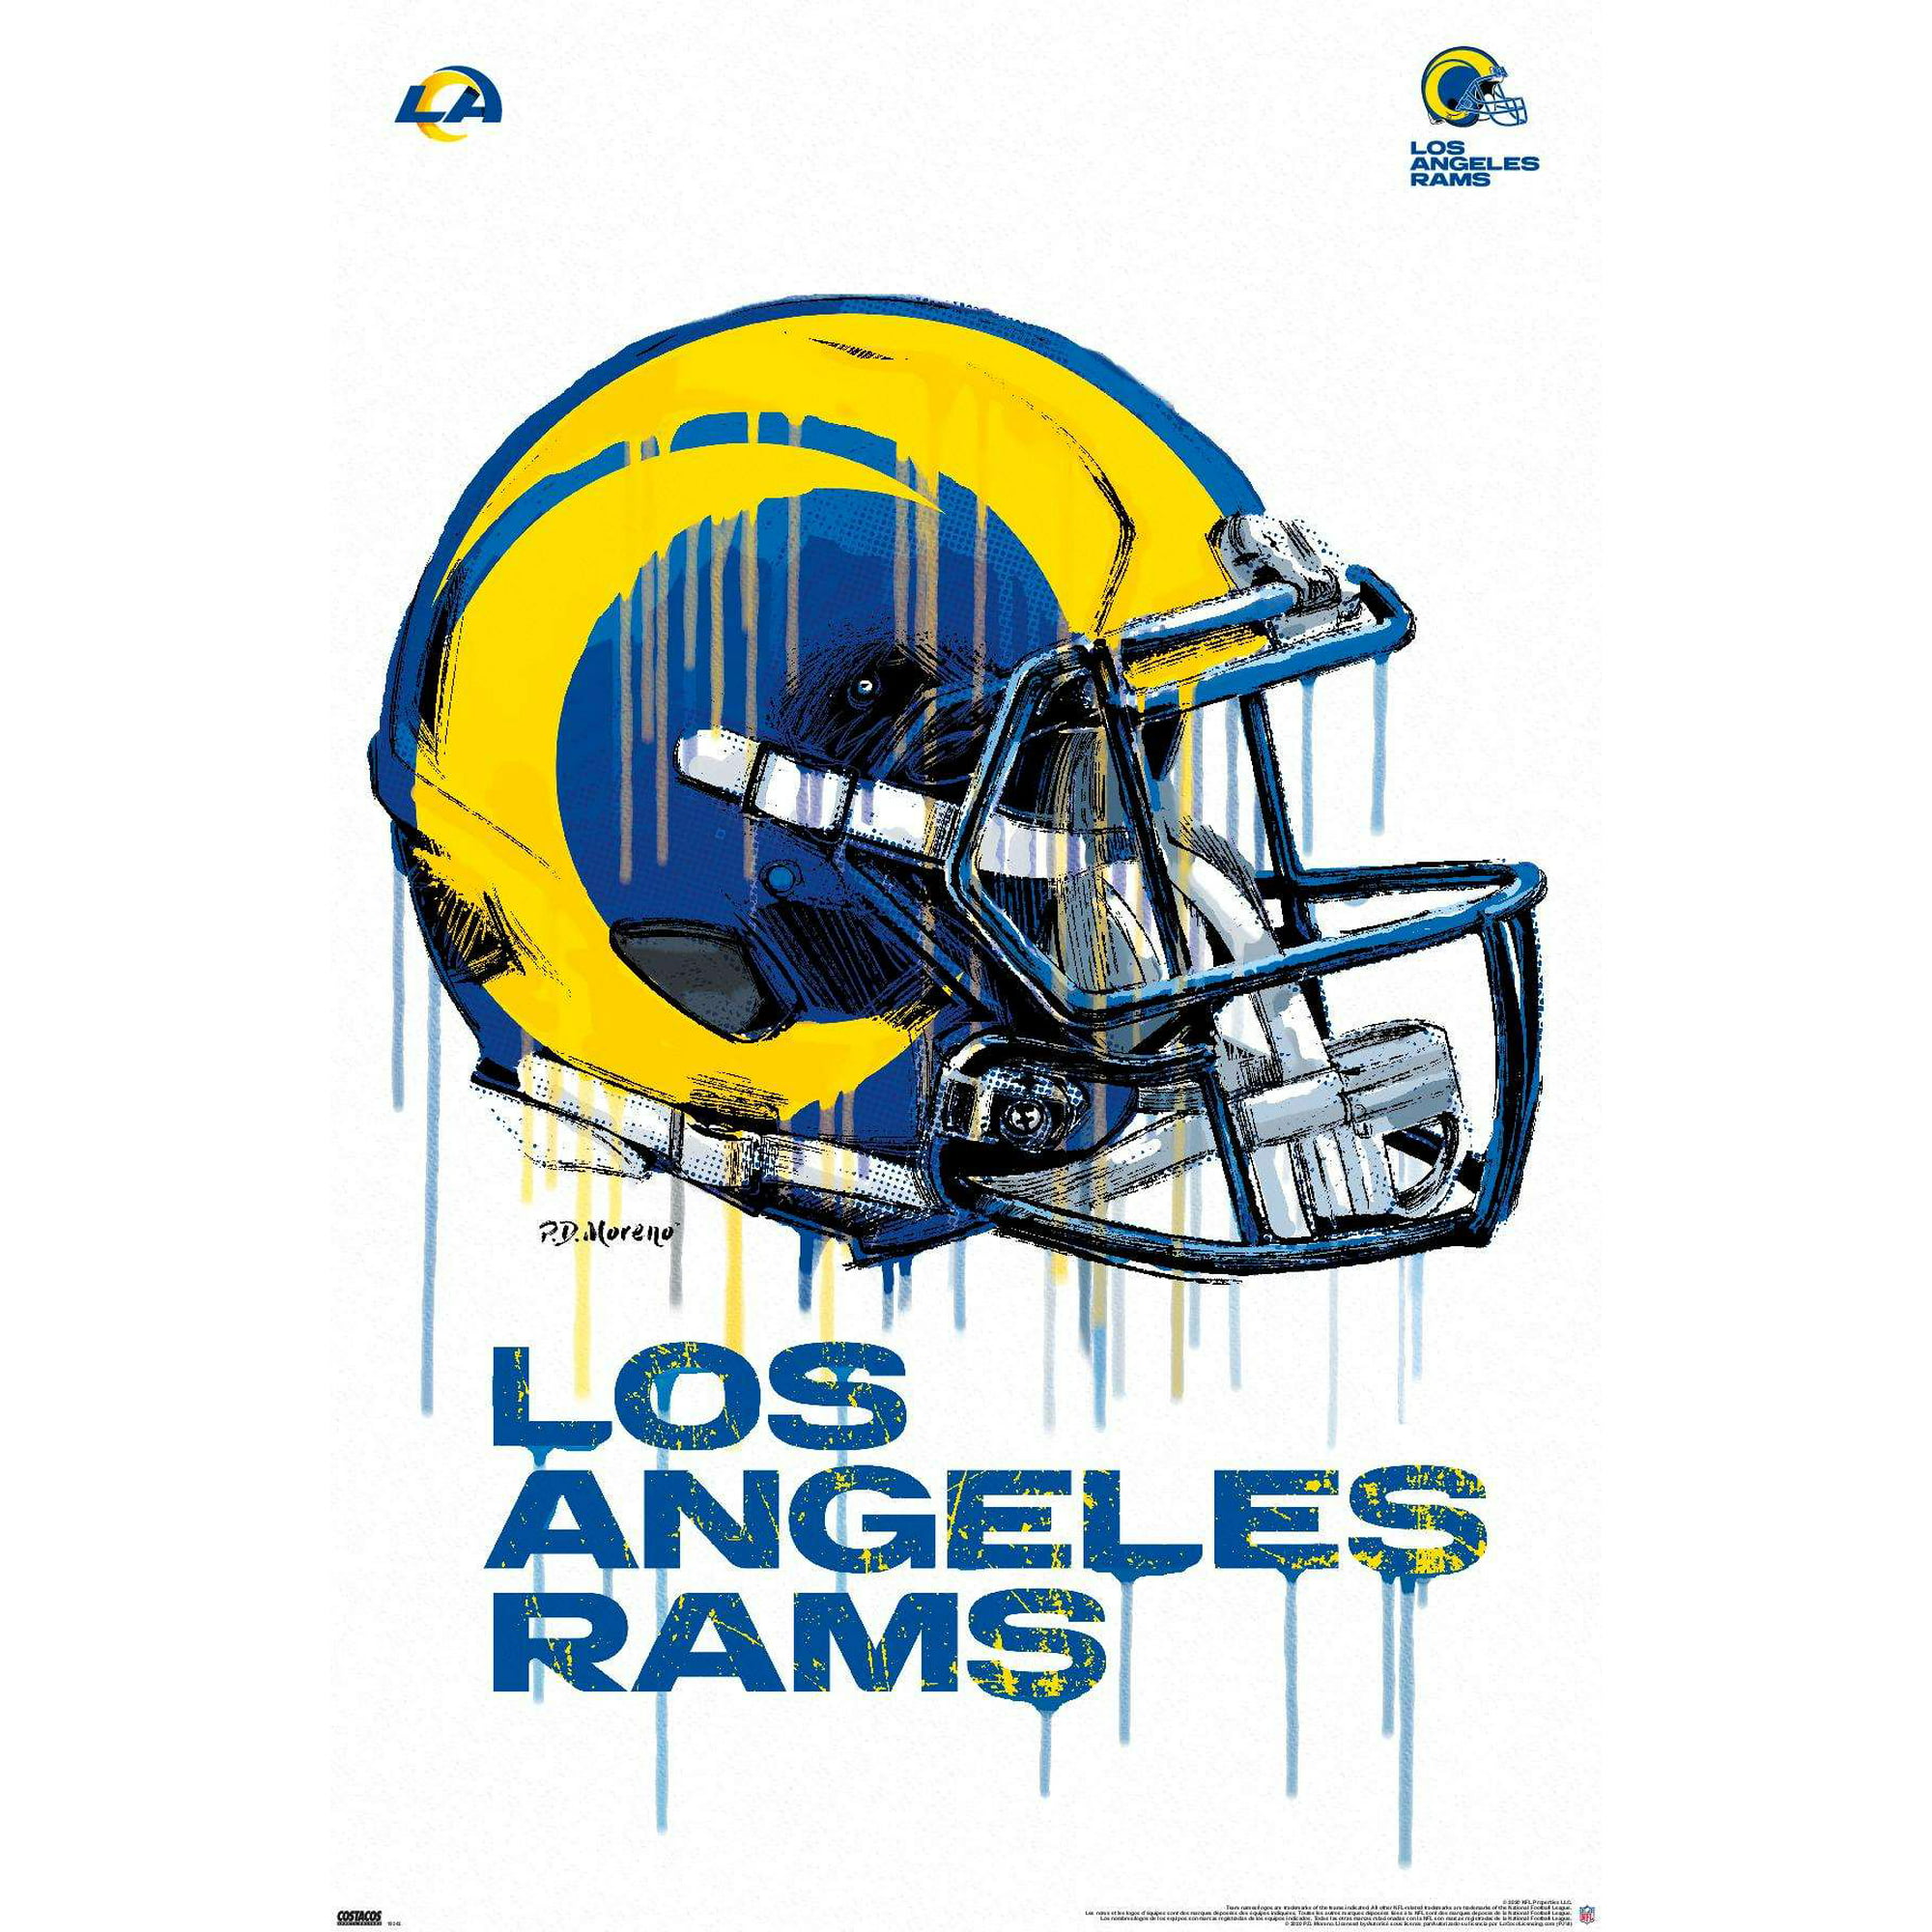 Los Angeles Rams on X: We're in LA, you know we had to bring the